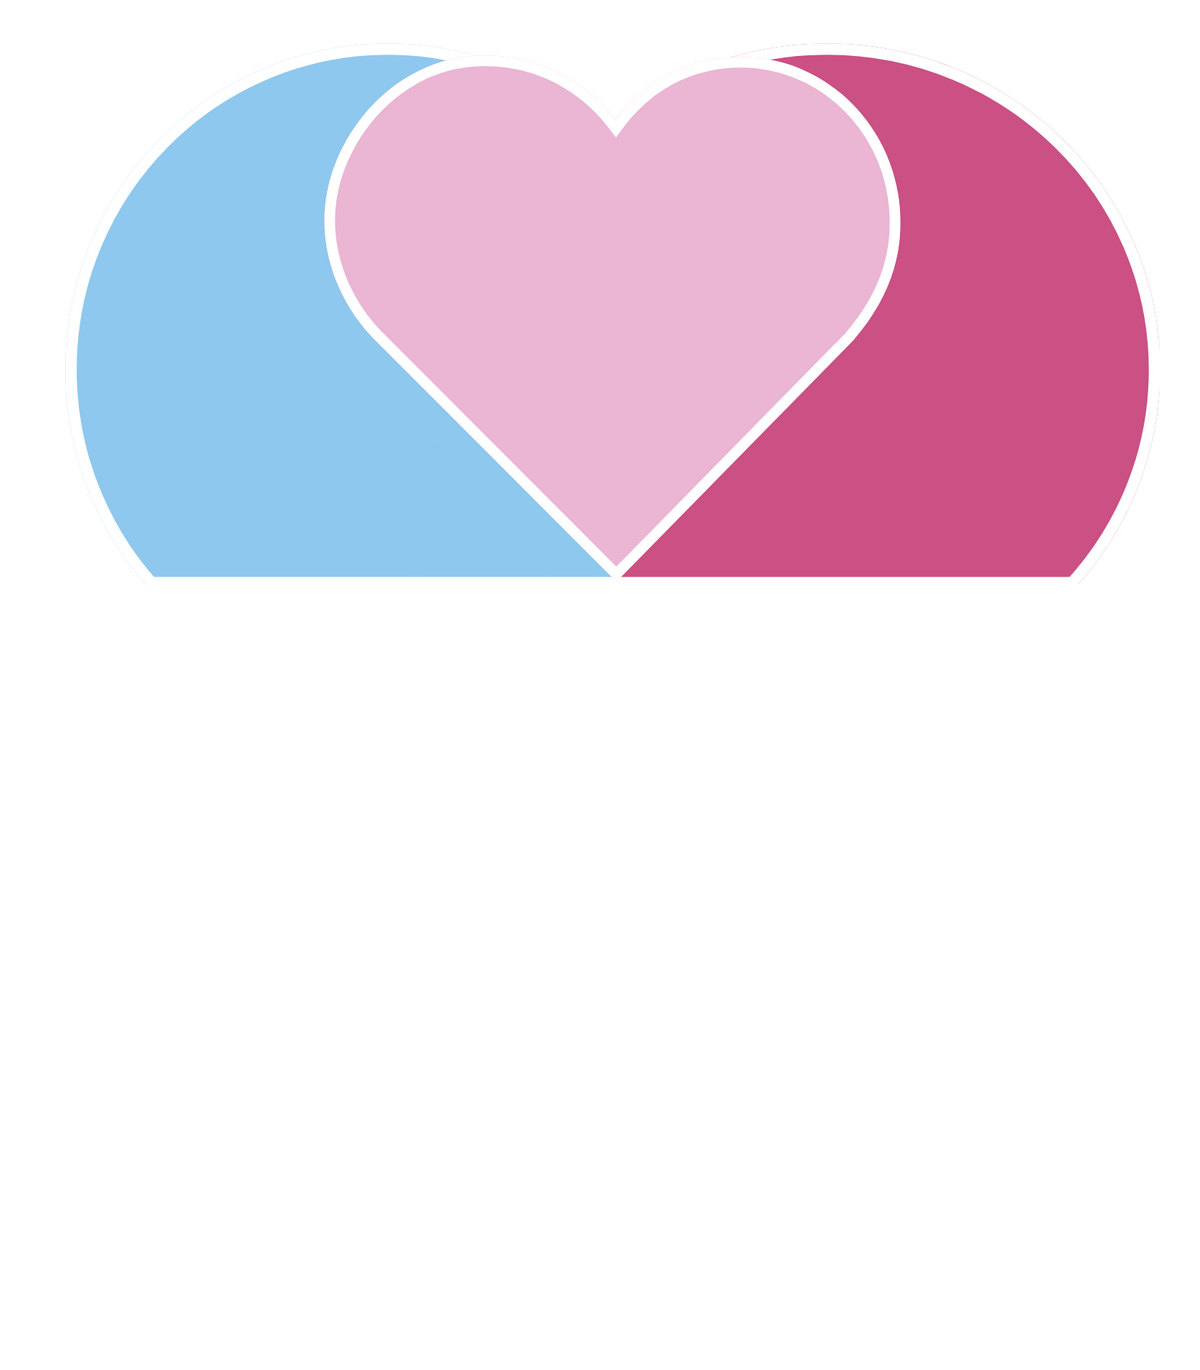 A stylised heart resembling the logo of the promise is supported by two upright columns.